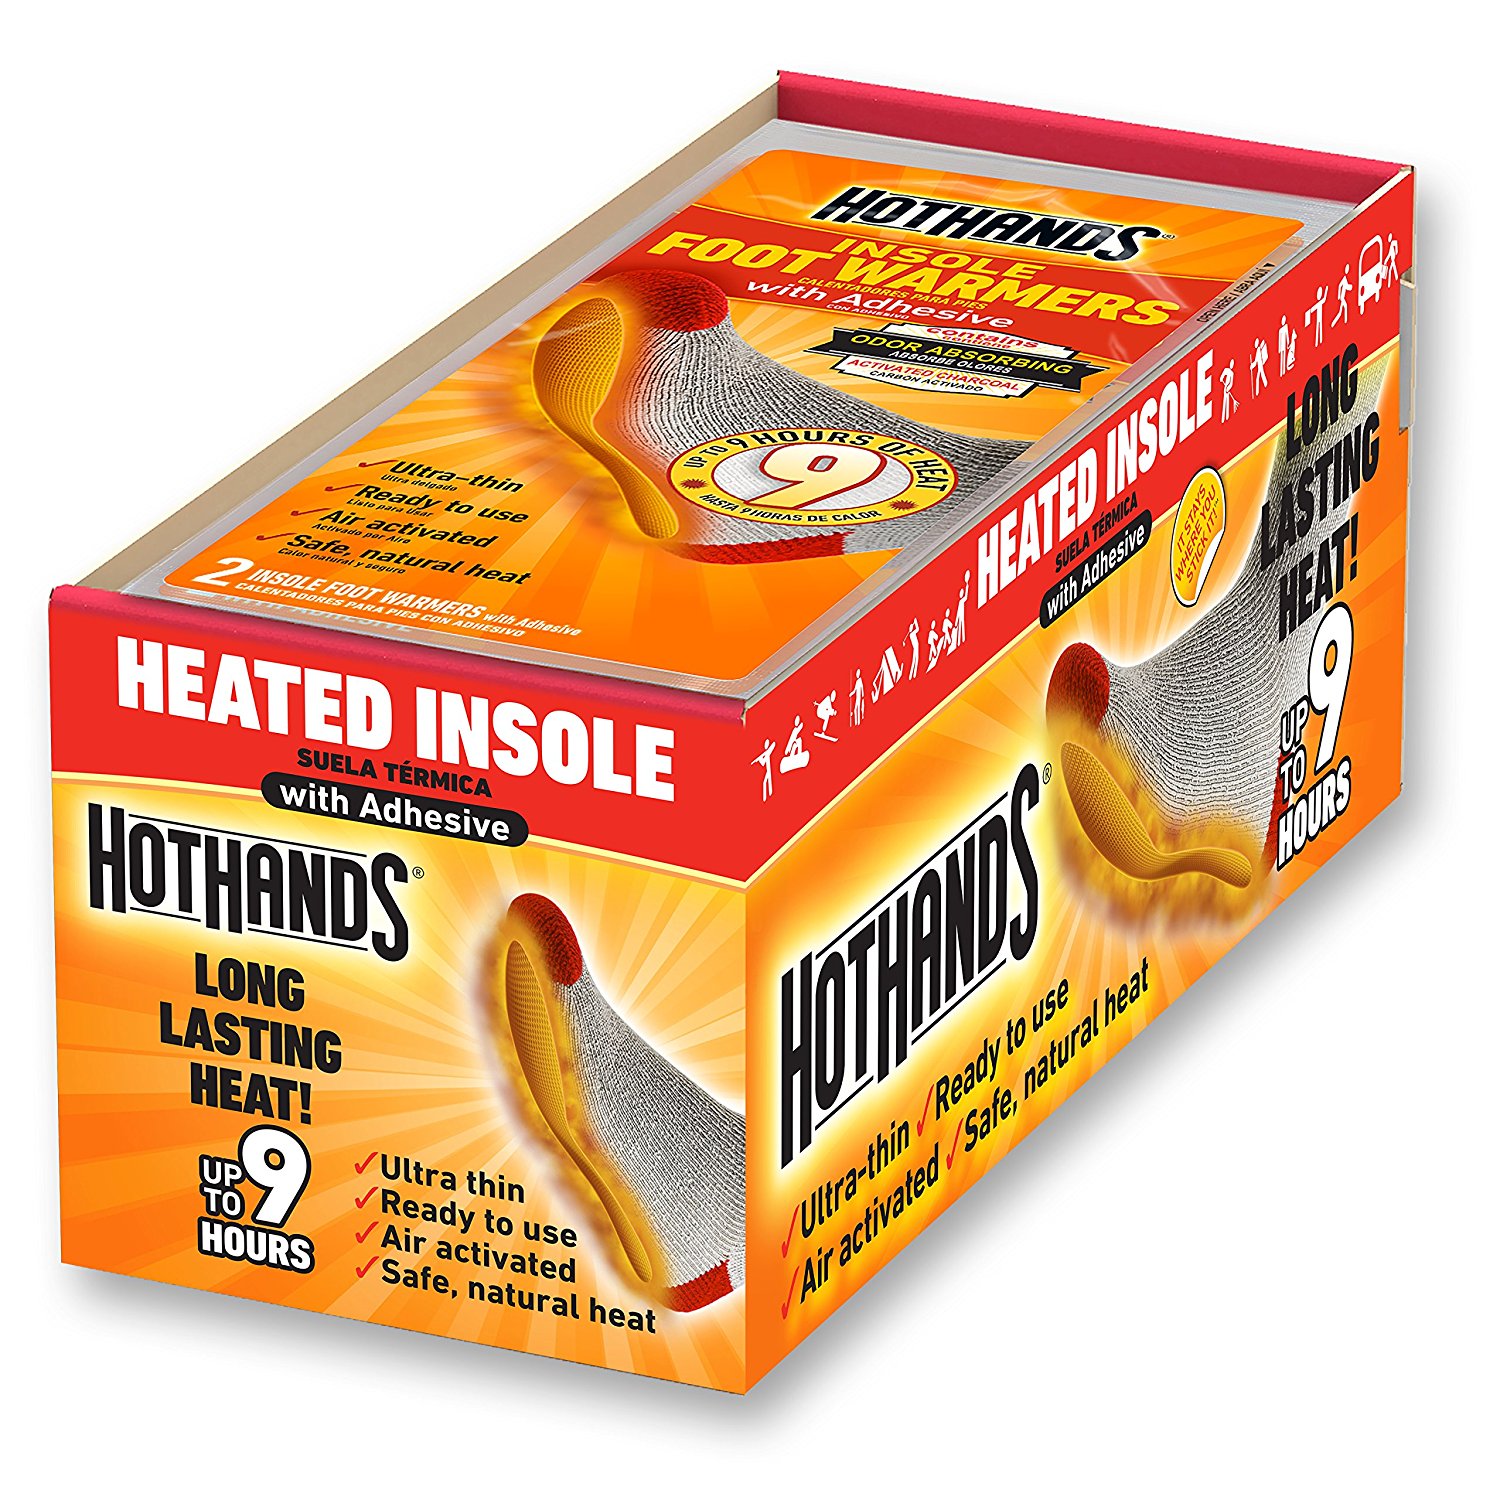 2 Pack Hothands Insole Foot Warmer 5 pair Each Value Pack 